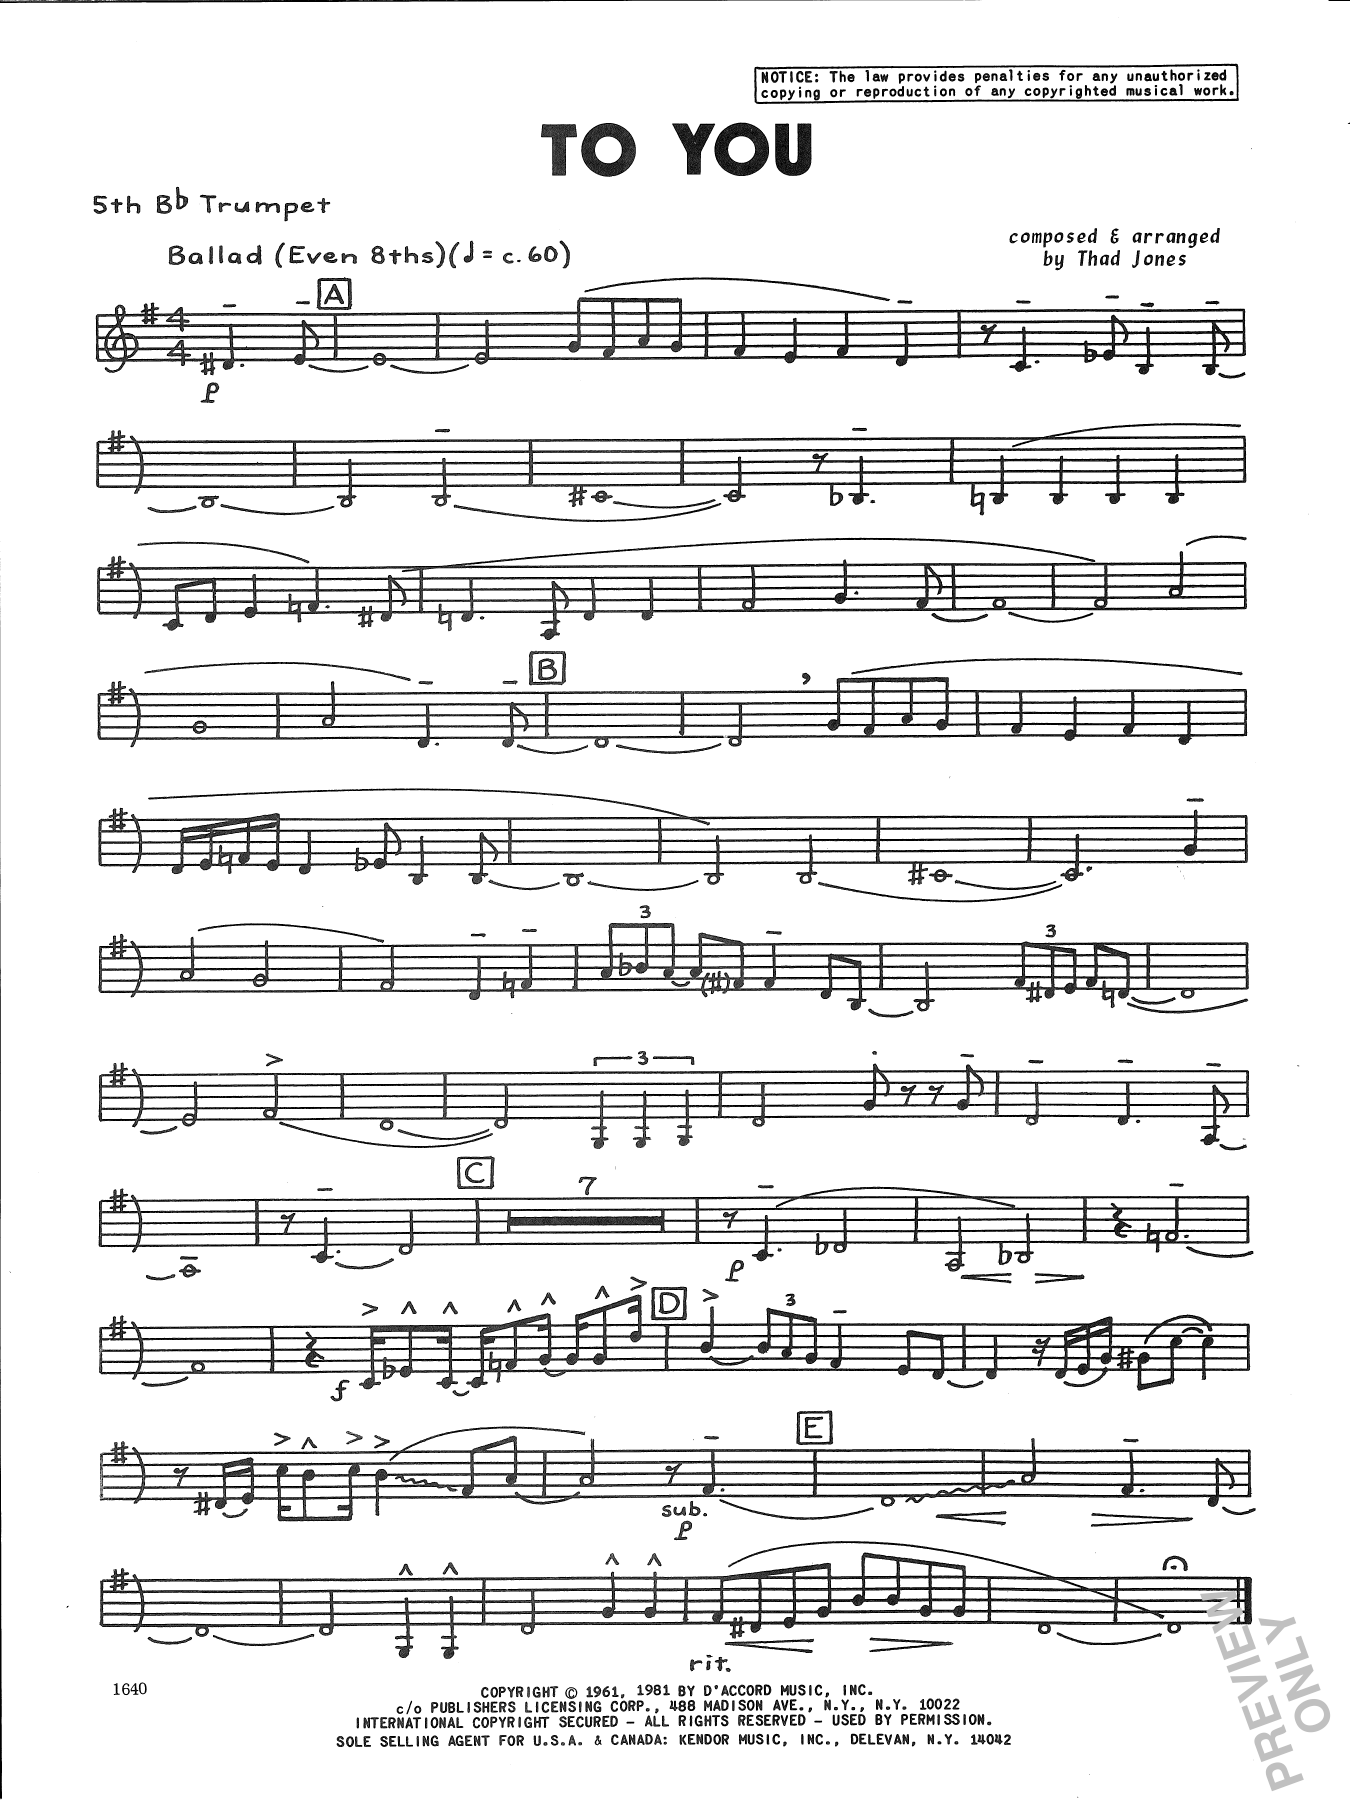 Download Thad Jones To You - 5th Bb Trumpet Sheet Music